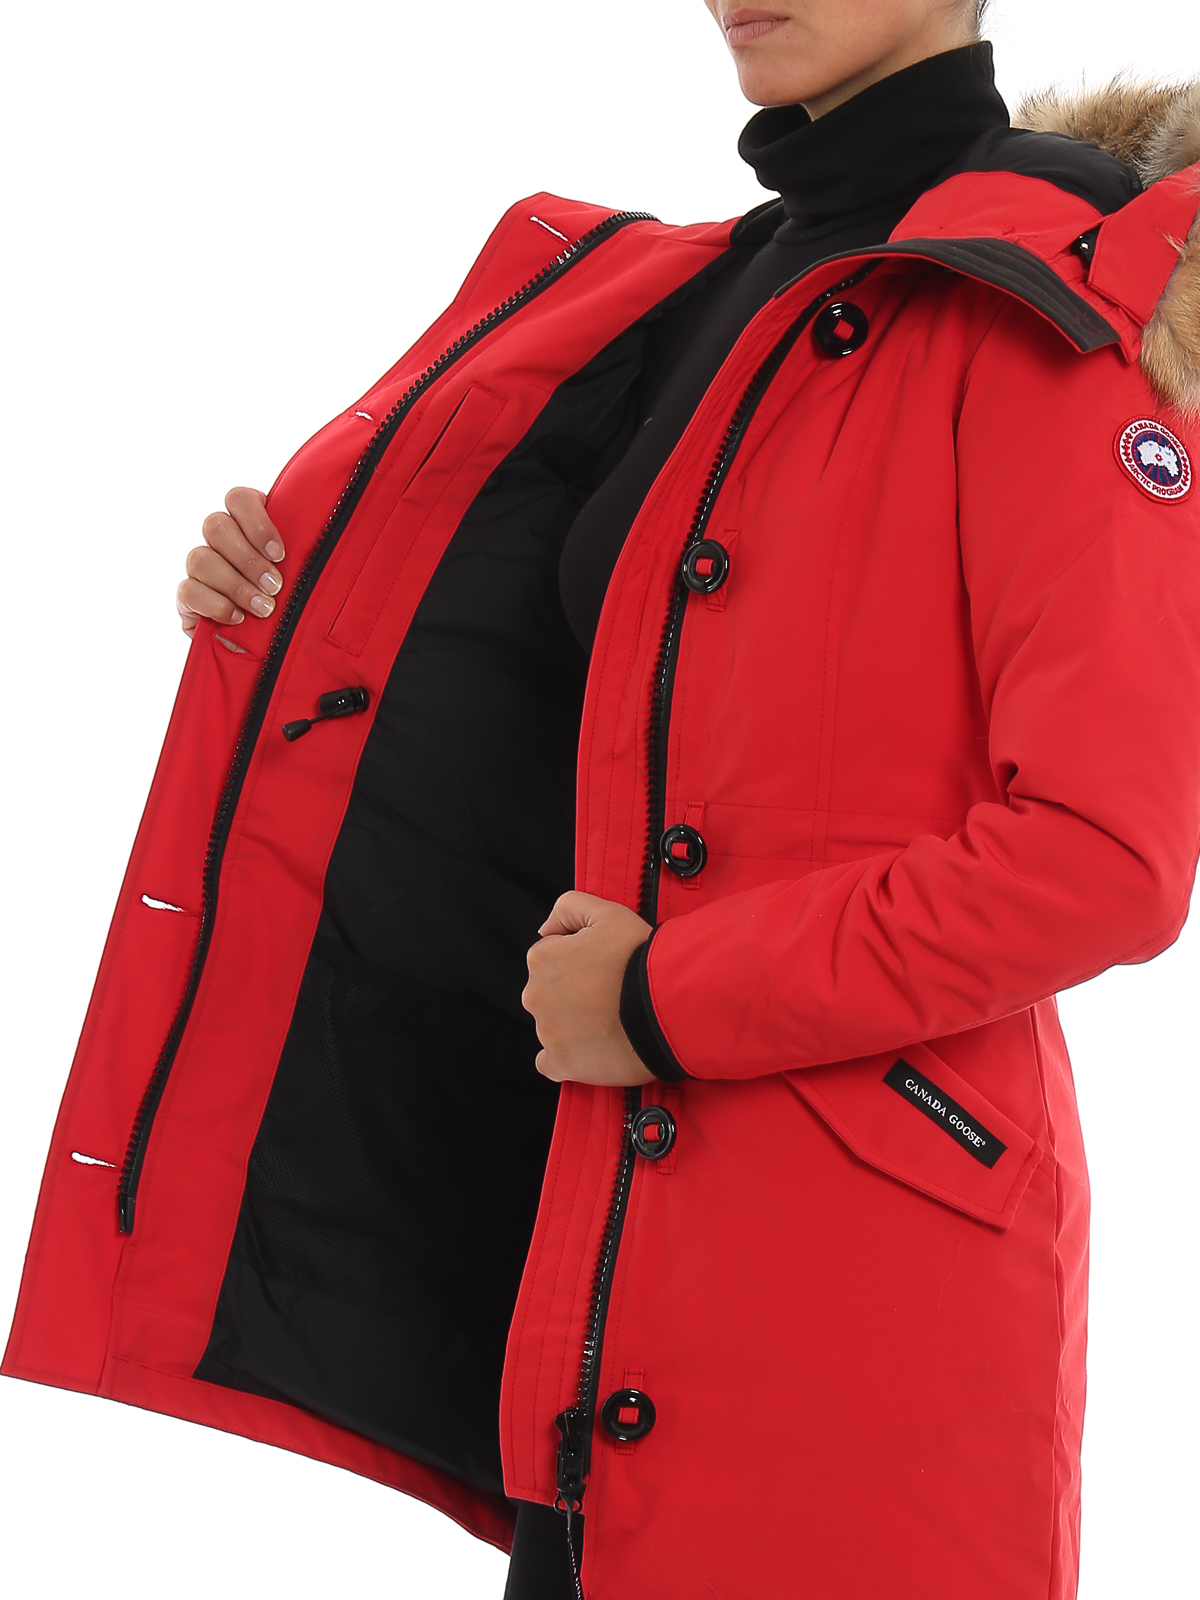 Canada Goose Rossclair Women's Parka Red 2580L-11| Buy Online At ...